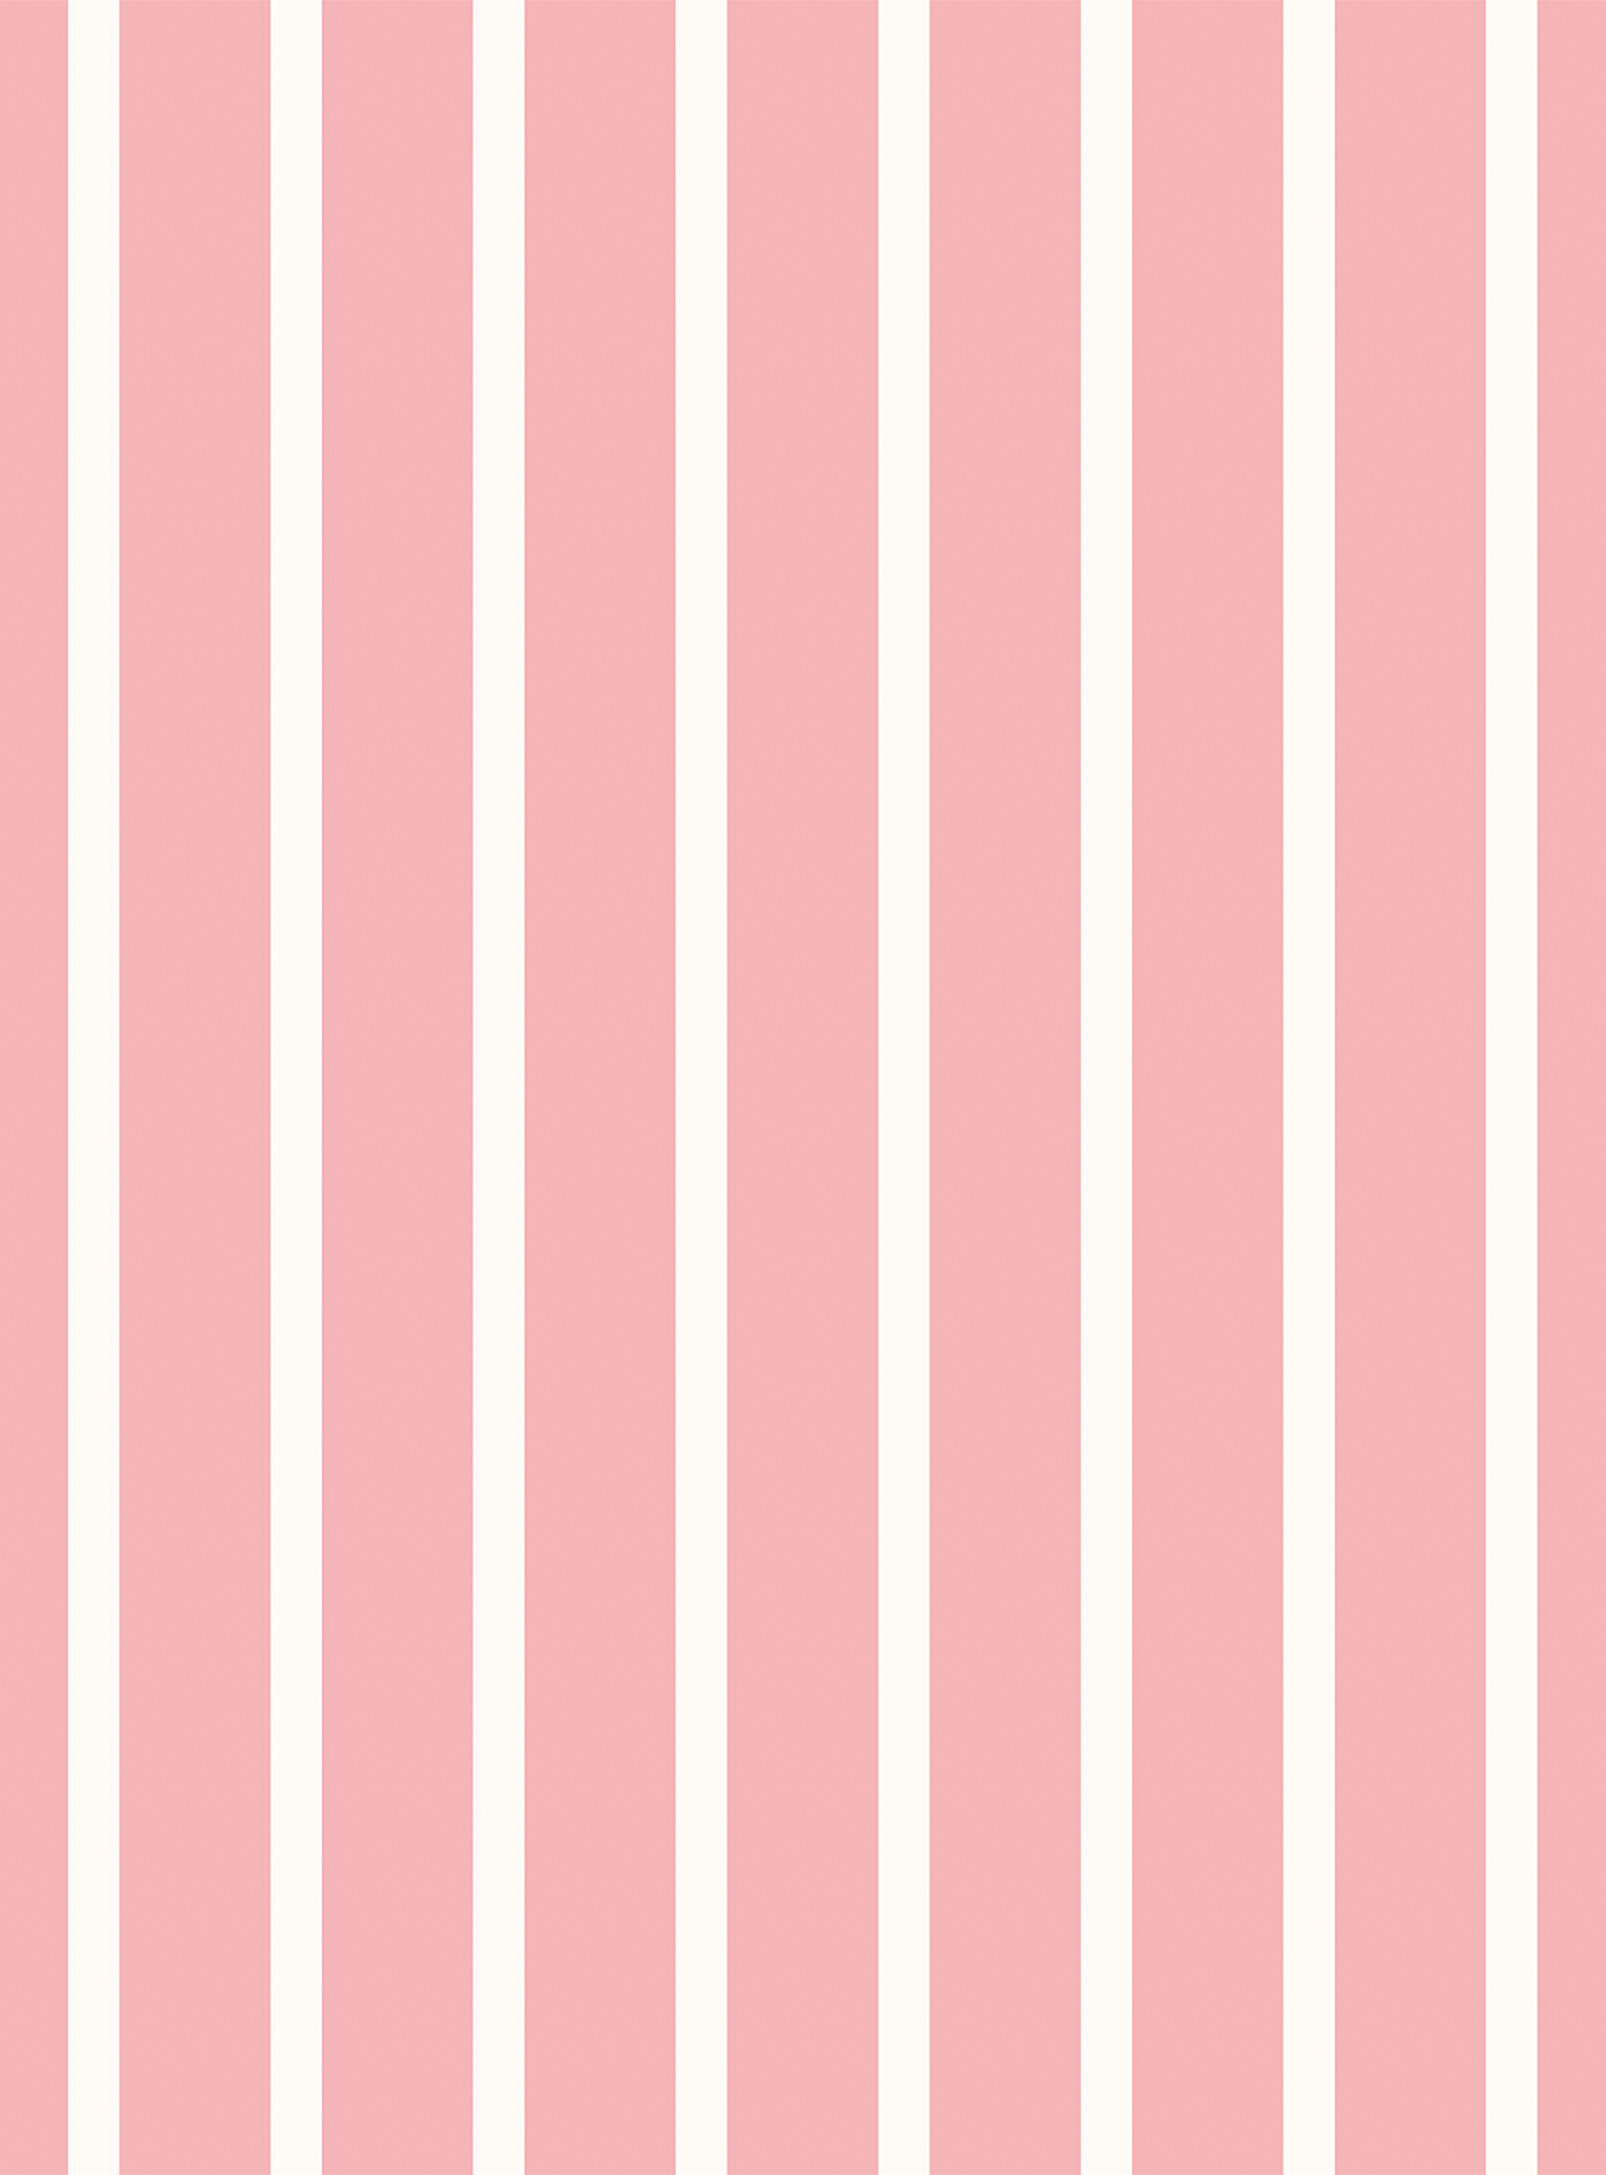 Station D Gelato Striped Wallpaper Strip See Available Sizes In Dusky Pink